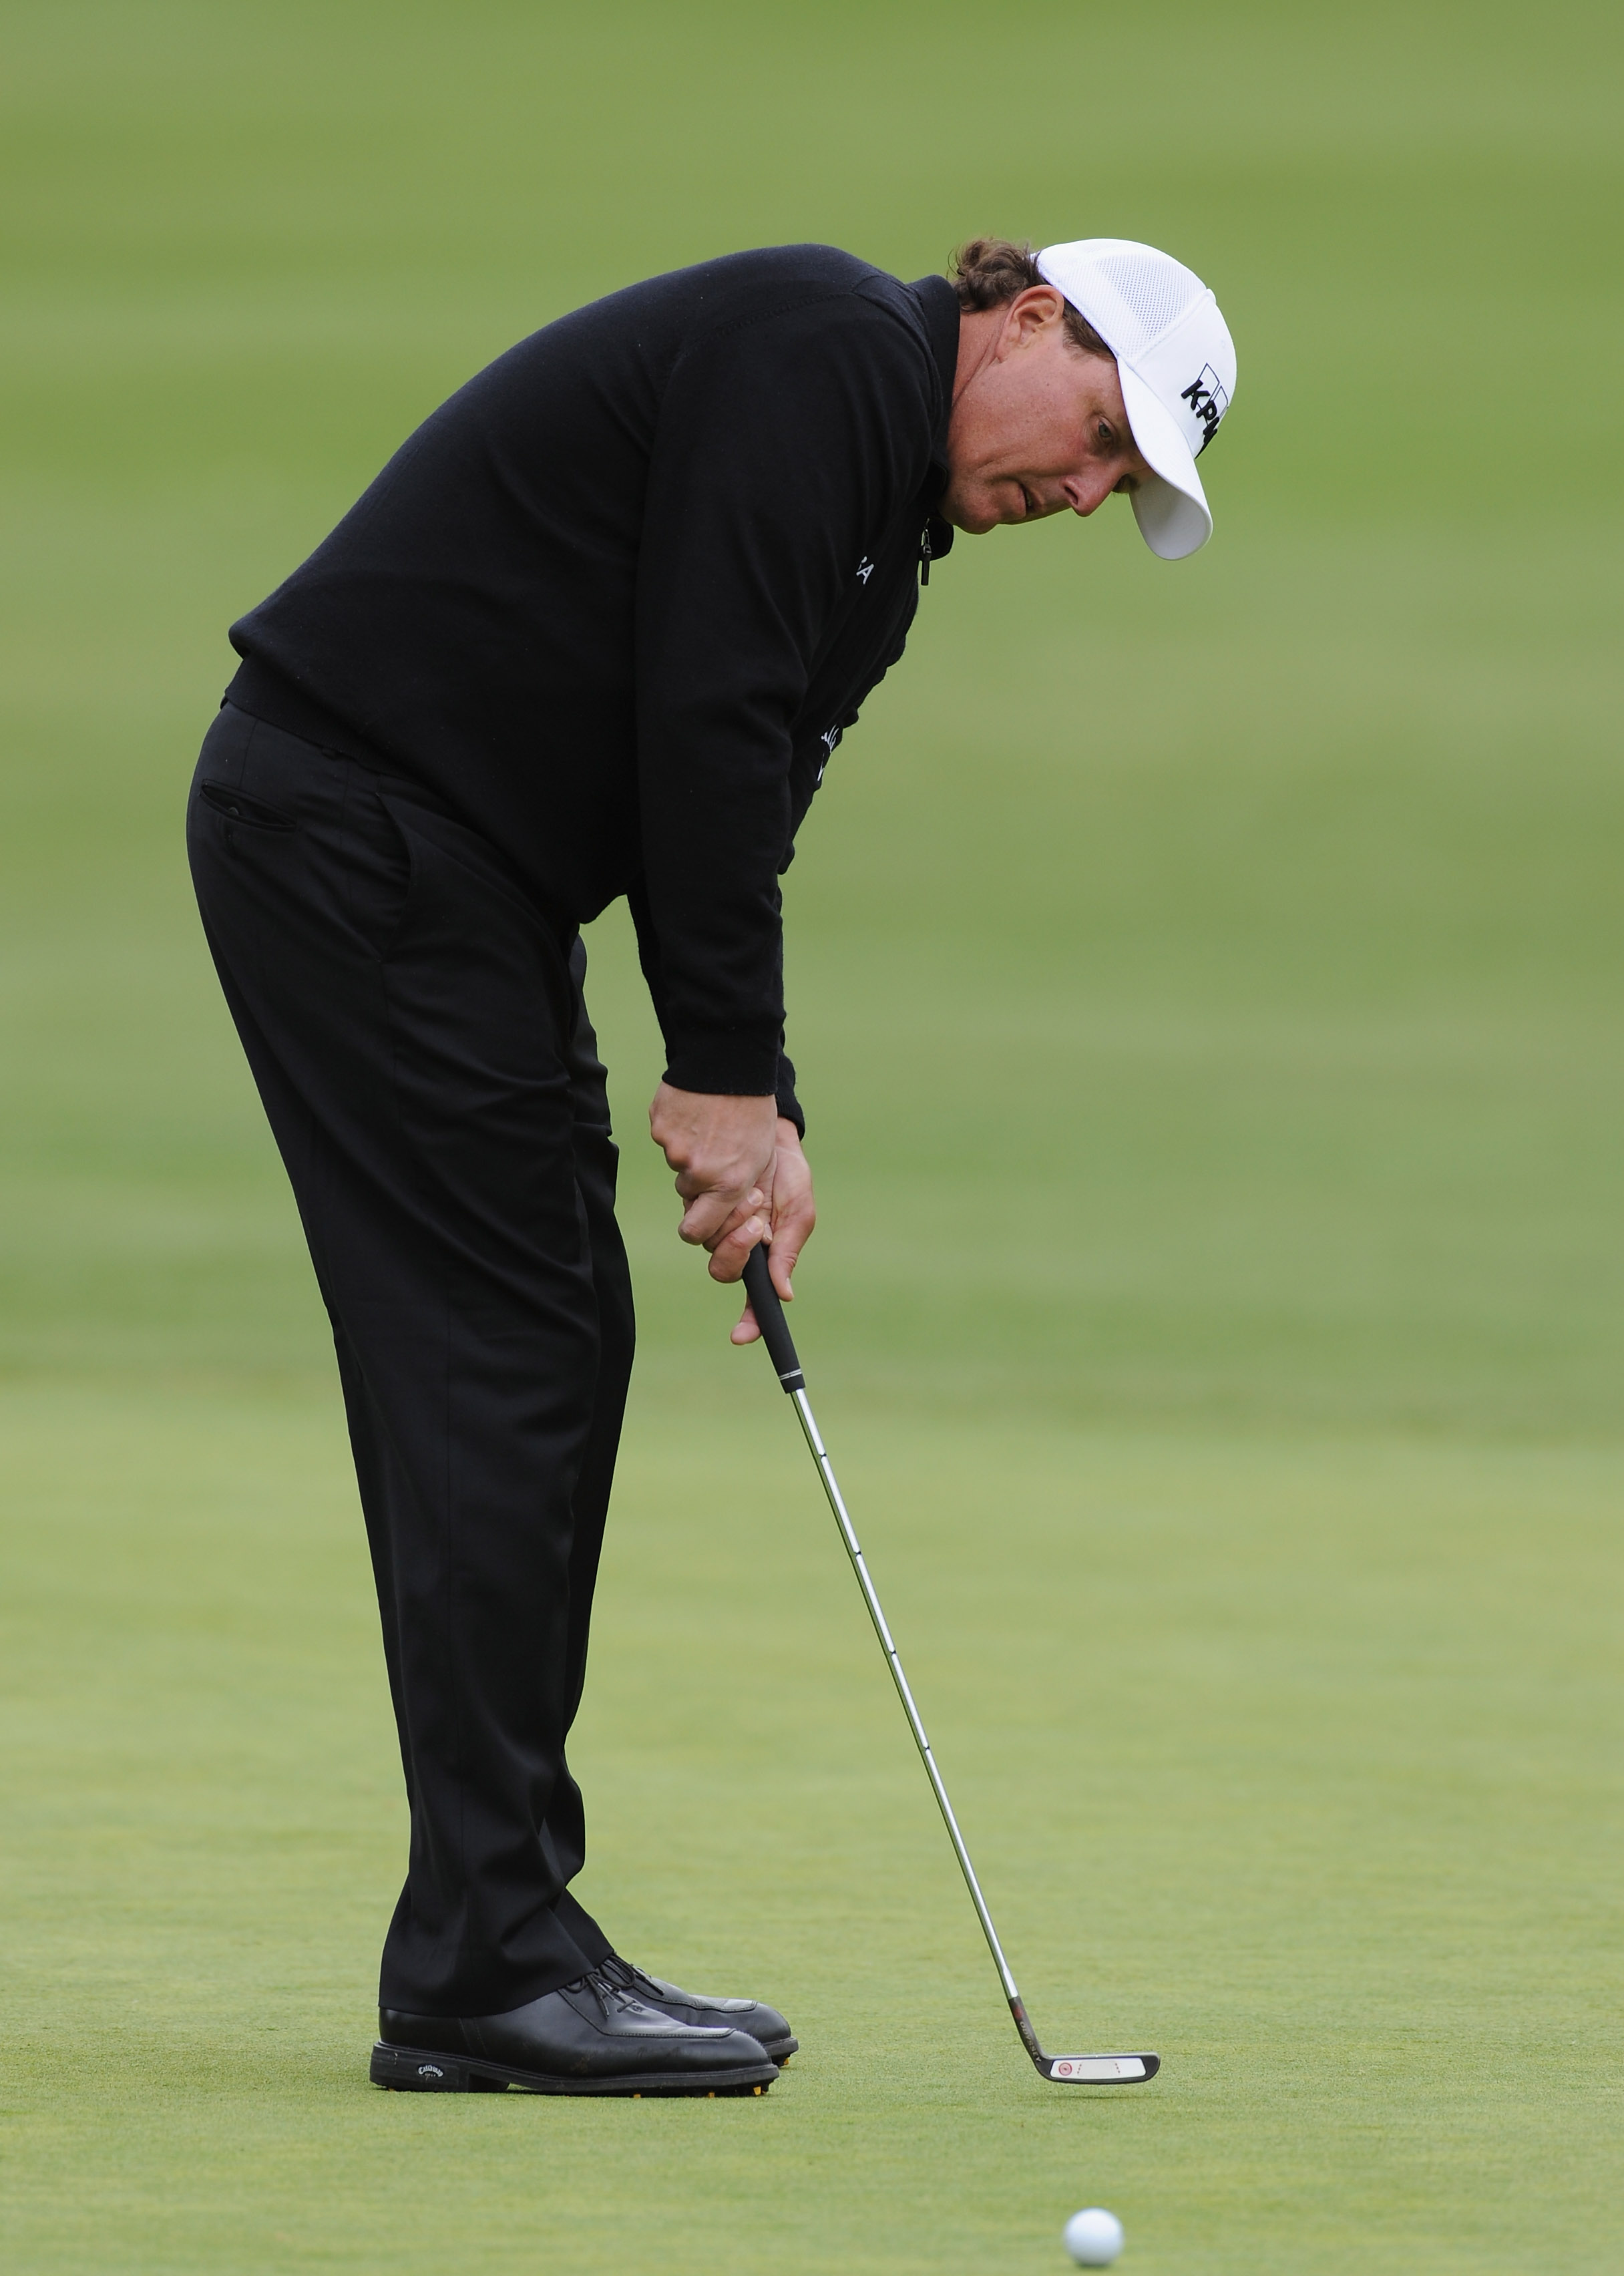 PACIFIC PALISADES, CA - FEBRUARY 18:  Phil Mickelson putting on the 13th hole during the second round of the Northern Trust Open at Riviera Country Club on February 18, 2011 in Pacific Palisades, California.  (Photo by Stuart Franklin/Getty Images)